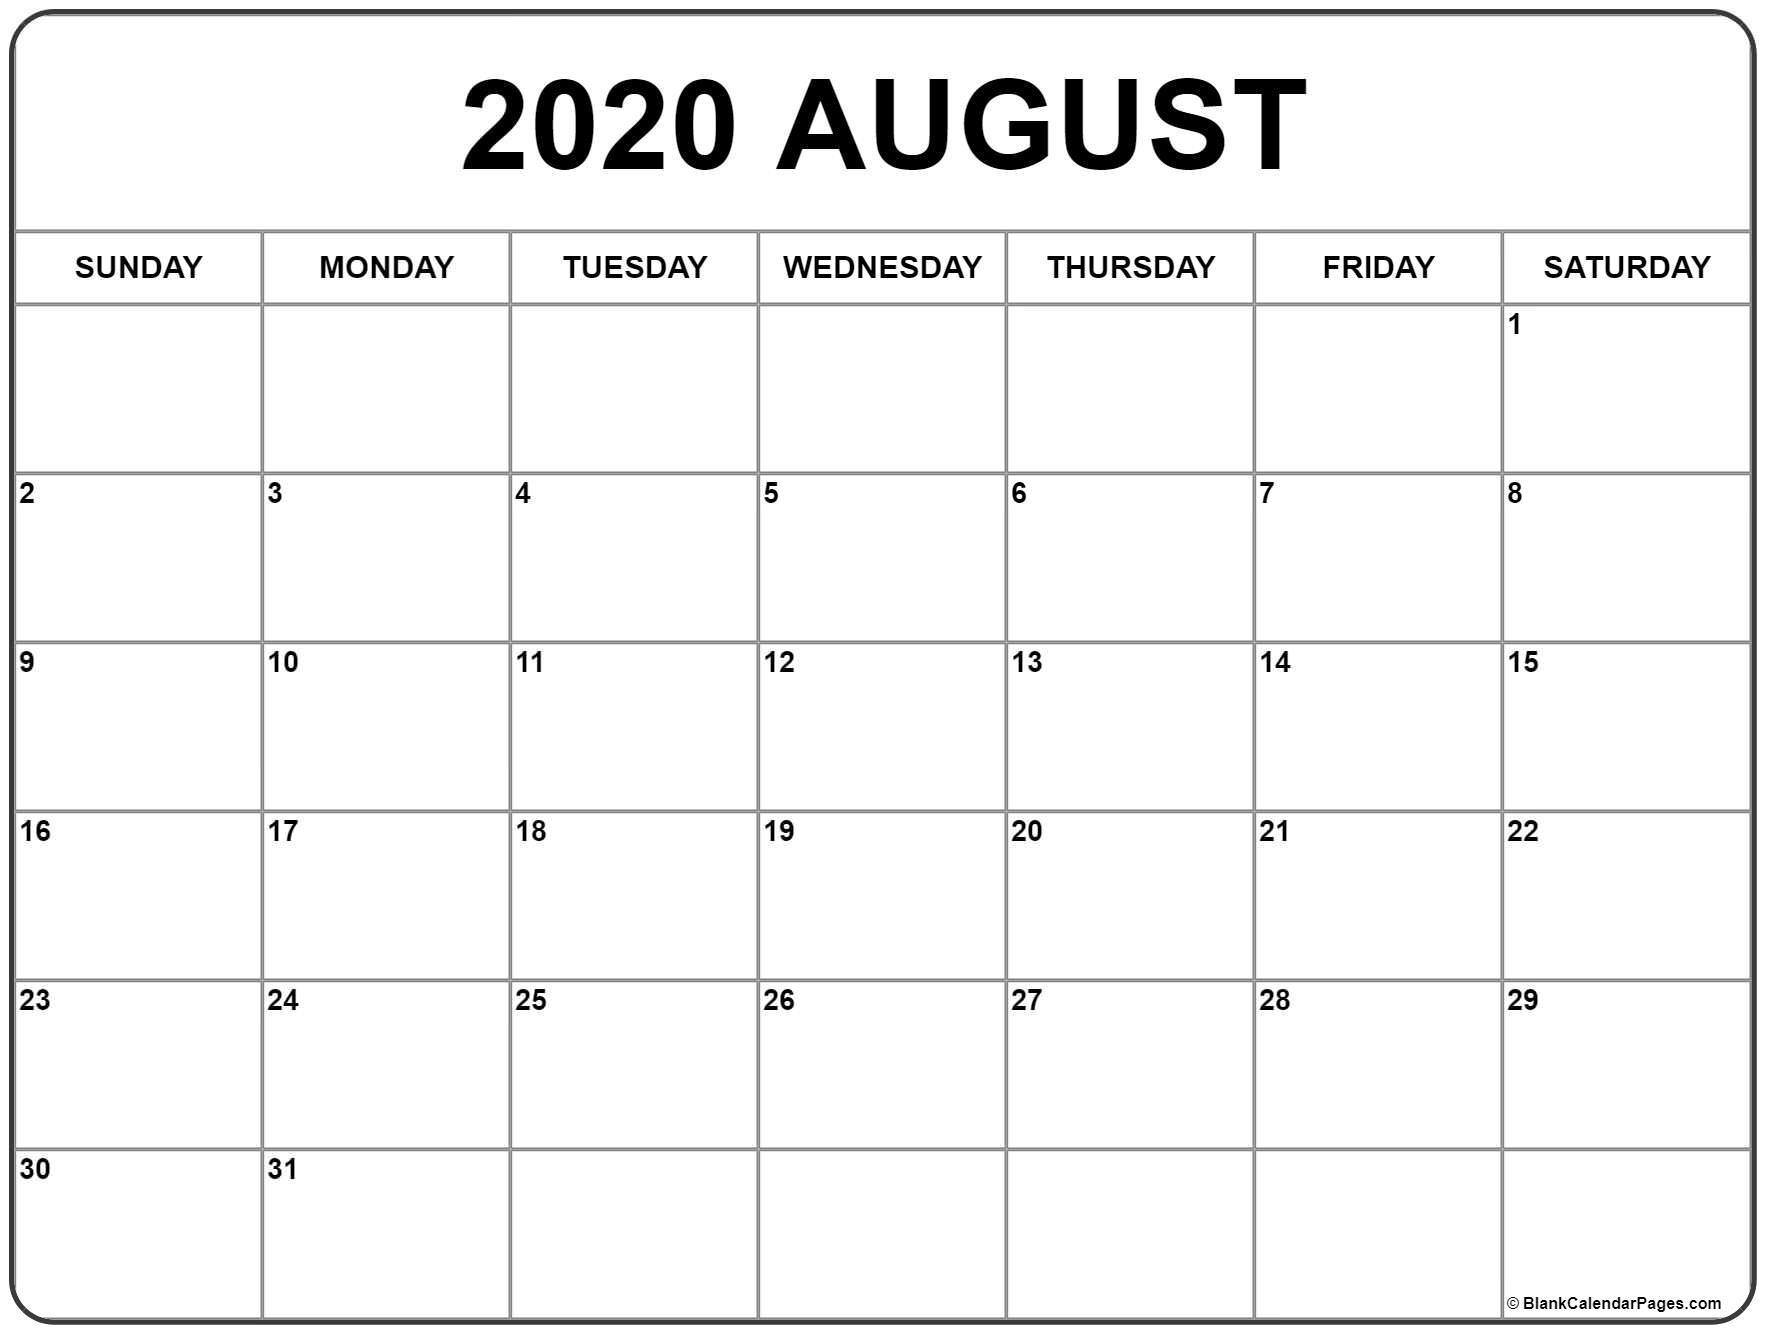 August 2020 Calendar | Free Printable Monthly Calendars-Blank Calendar For June July And August 2020